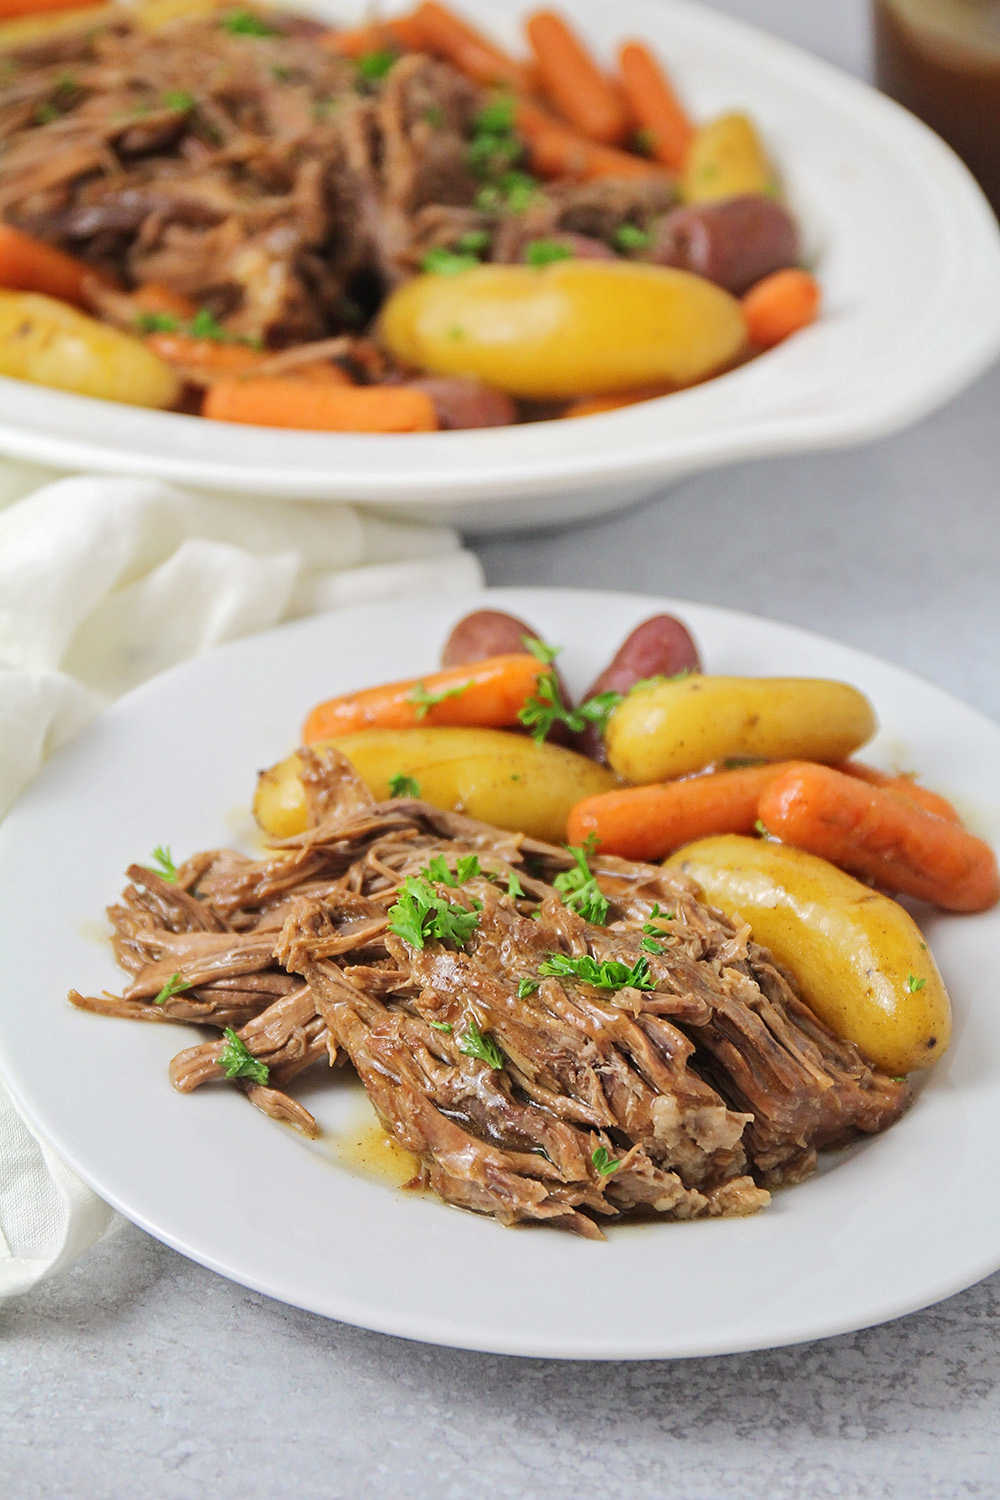 This tender and juicy Instant Pot pot roast is so easy to make, and so flavorful! It's a time-saving way to make a delicious roast!